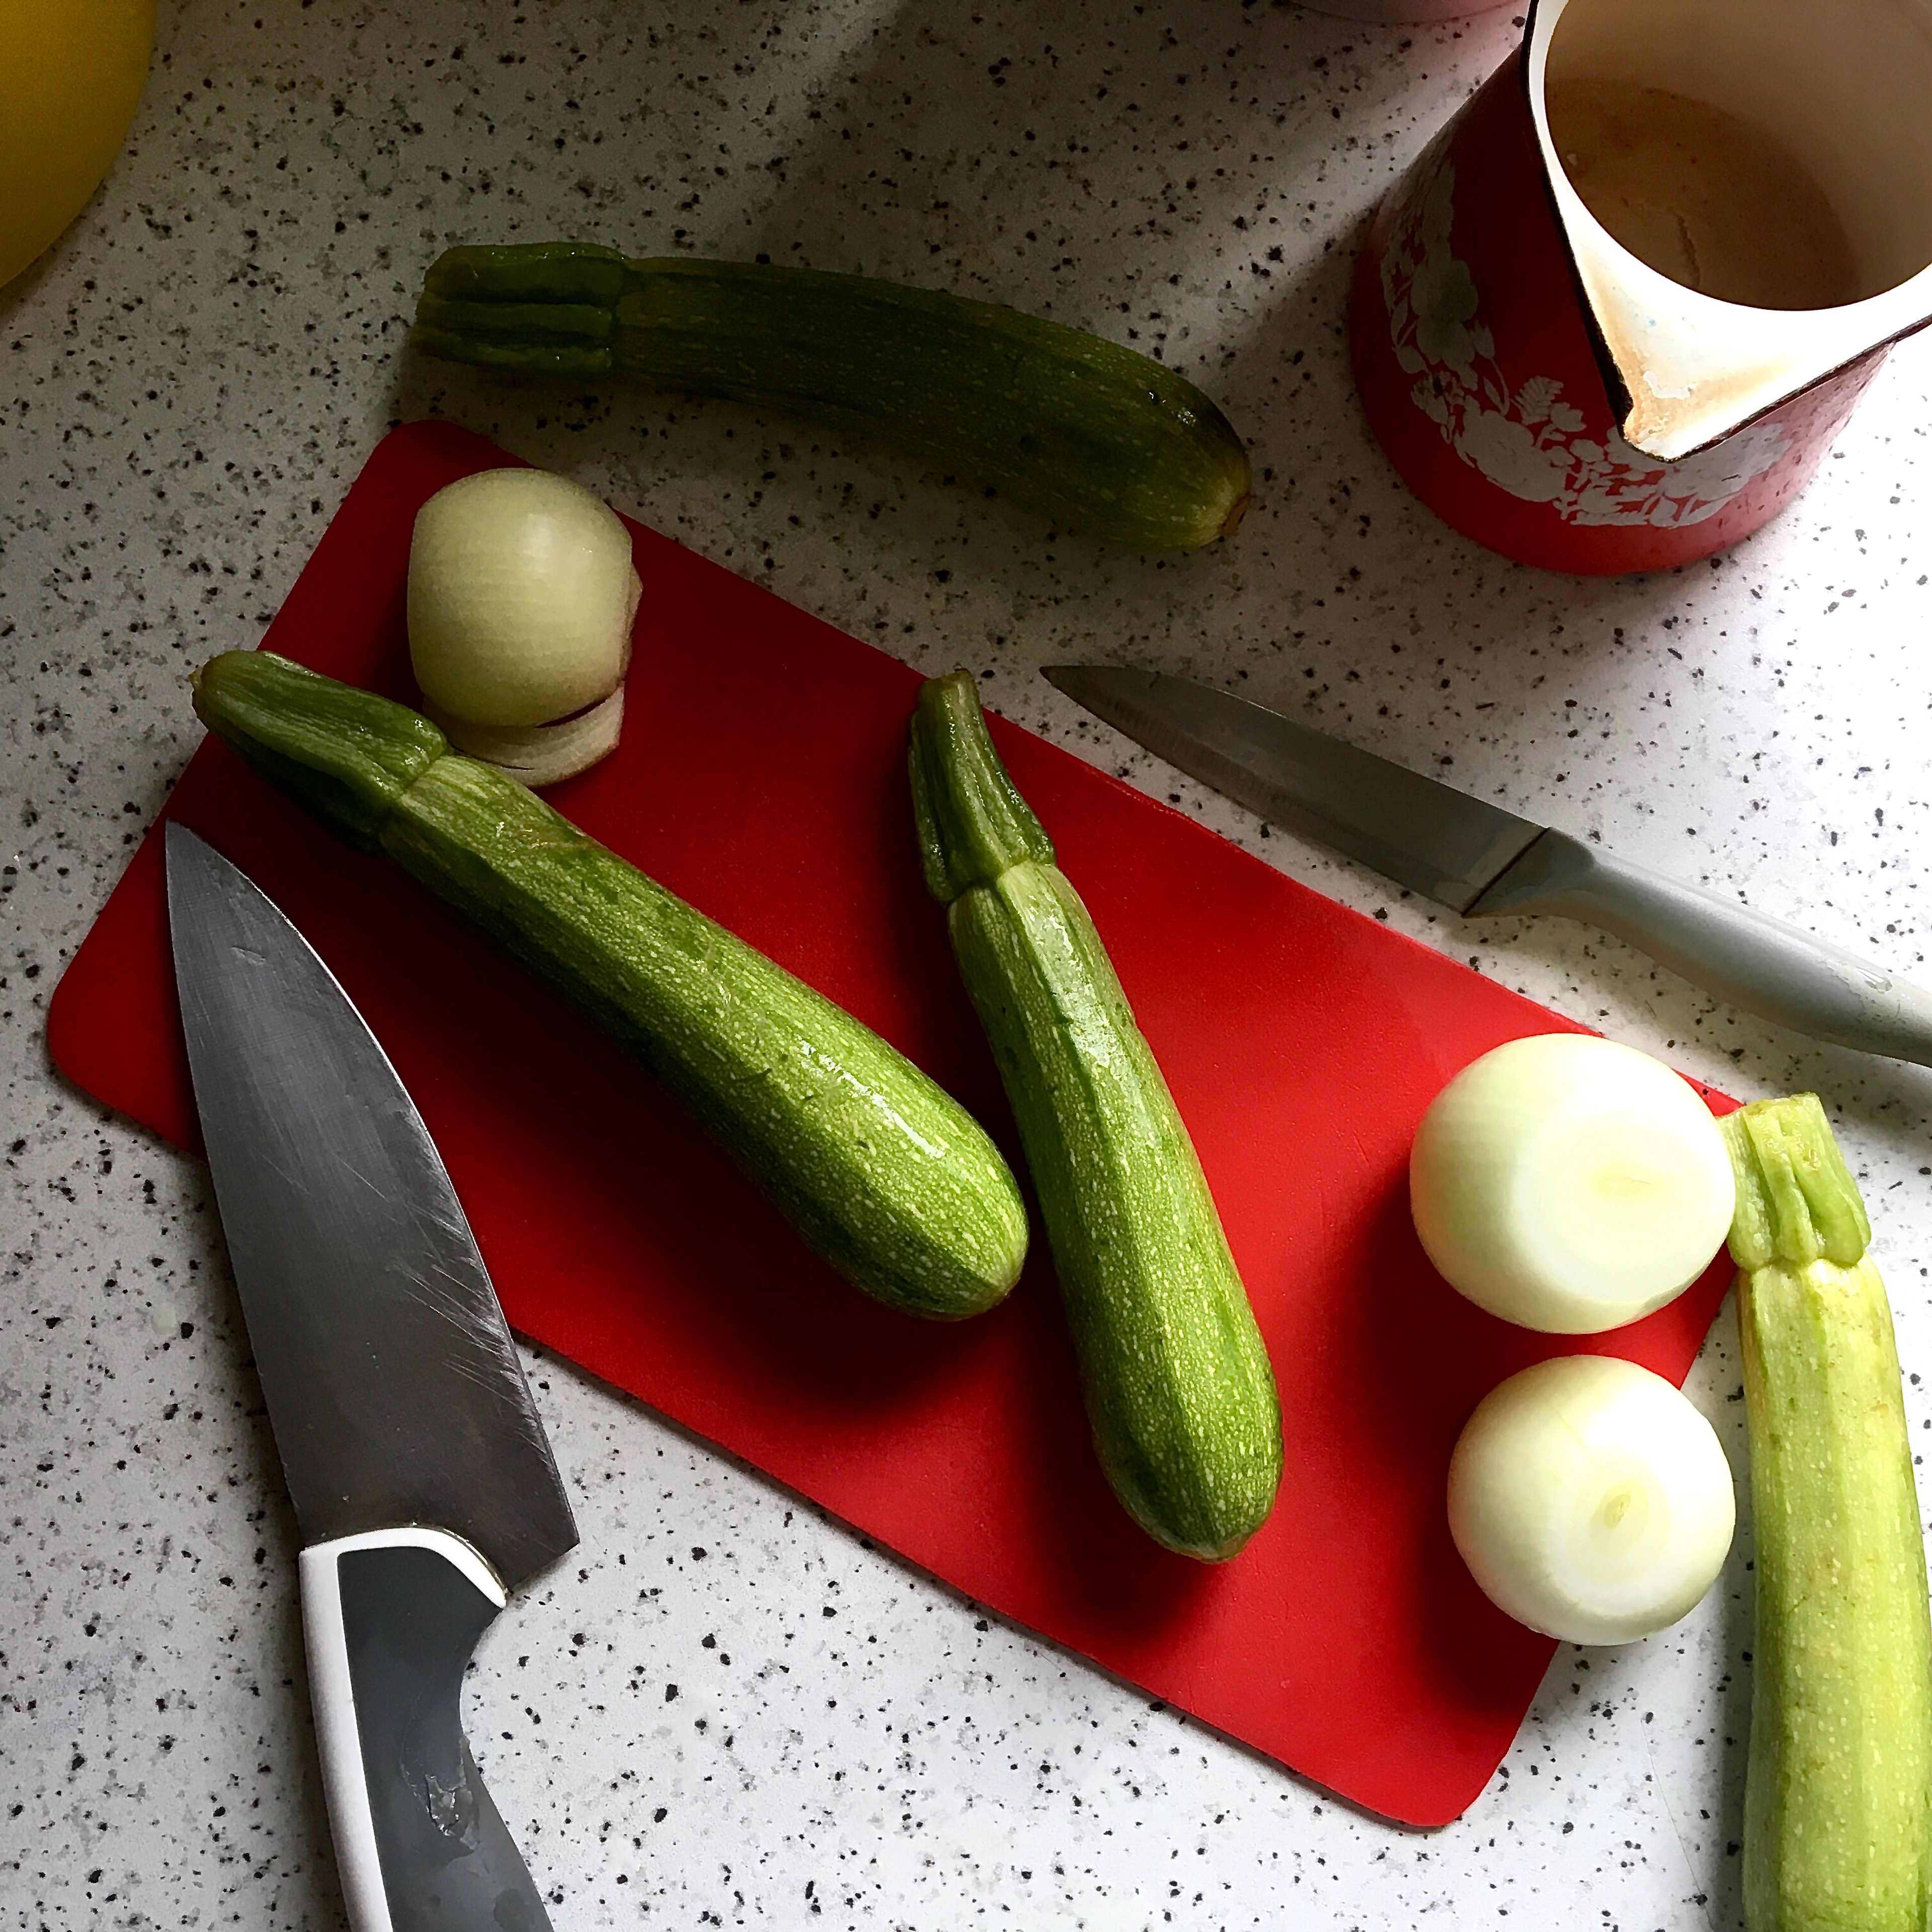 Cut zucchini into matchsticks or half-moon rounds. Add to a large pan over medium heat with a drizzle of olive oil. Cook for 3-4 min. until a bit soften. Season to taste with salt & pepper. Remove from the heat.